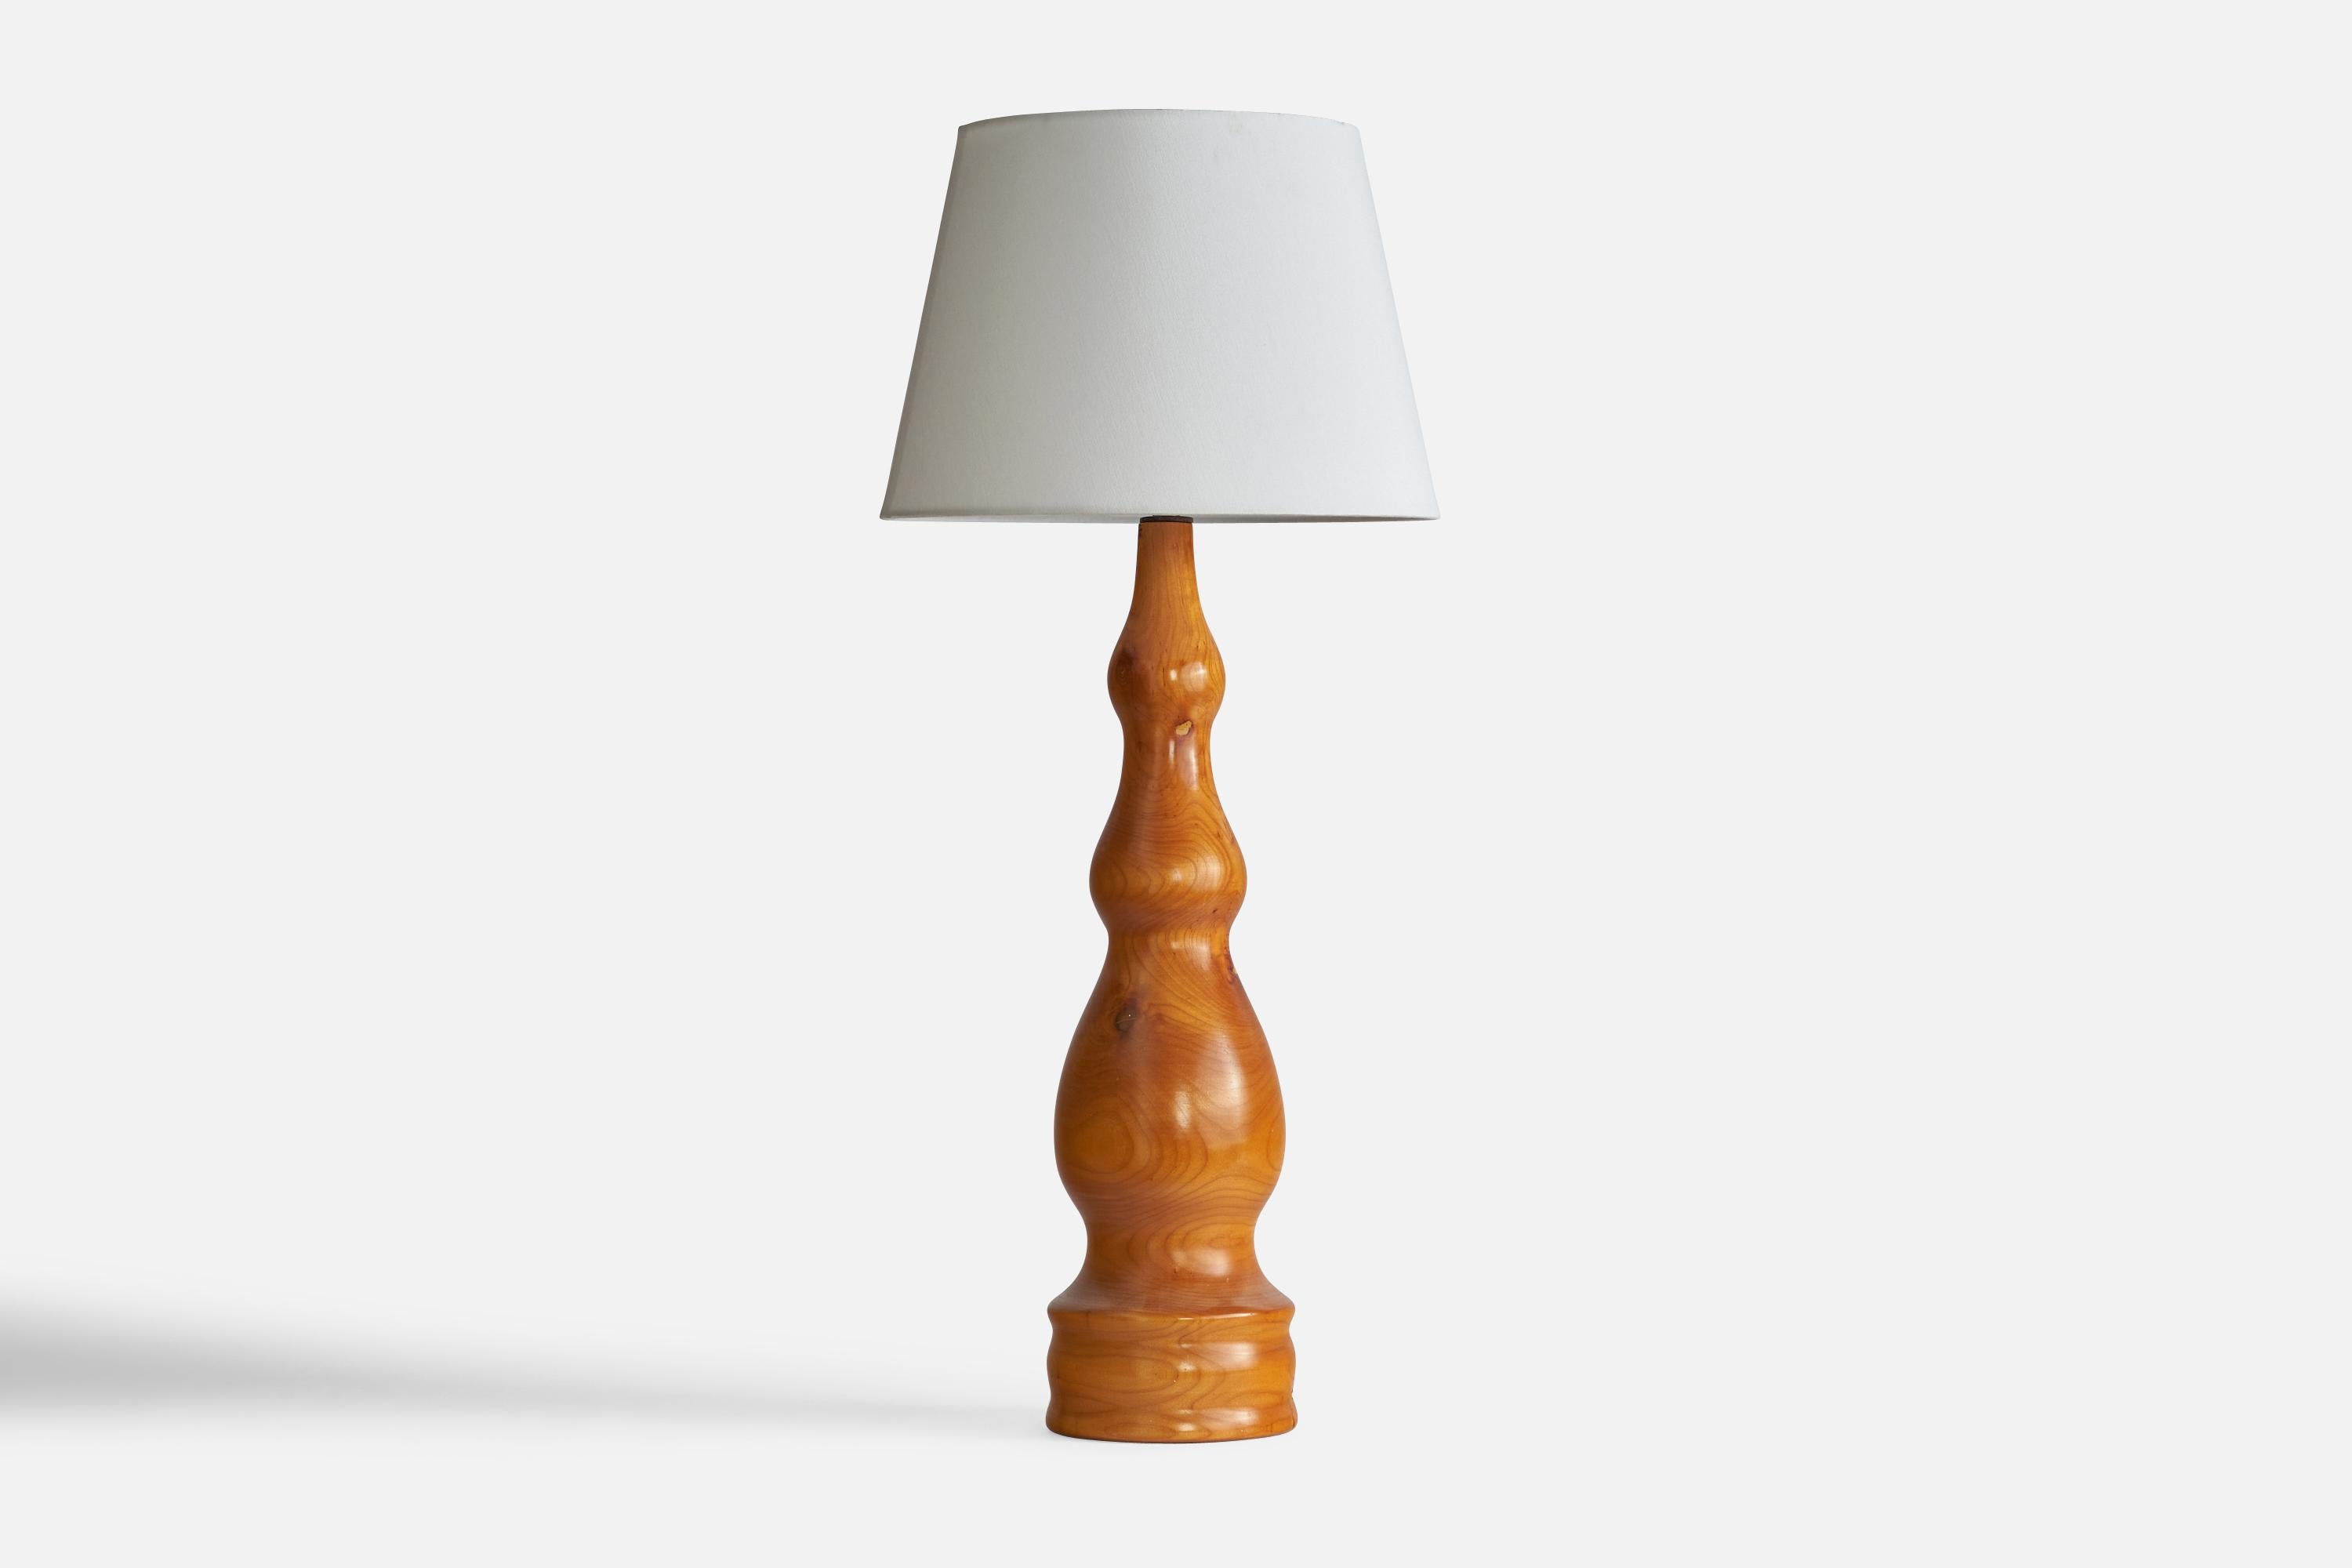 A large maple table lamp designed and produced in the US, 1950s.

Dimensions of Lamp (inches): 26.25” x 6.2” Diameter
Dimensions of Shade (inches): 10” Top Diameter x 14” Bottom Diameter x 10” H
Dimensions of Lamp with Shade (inches): 32” H x 14”